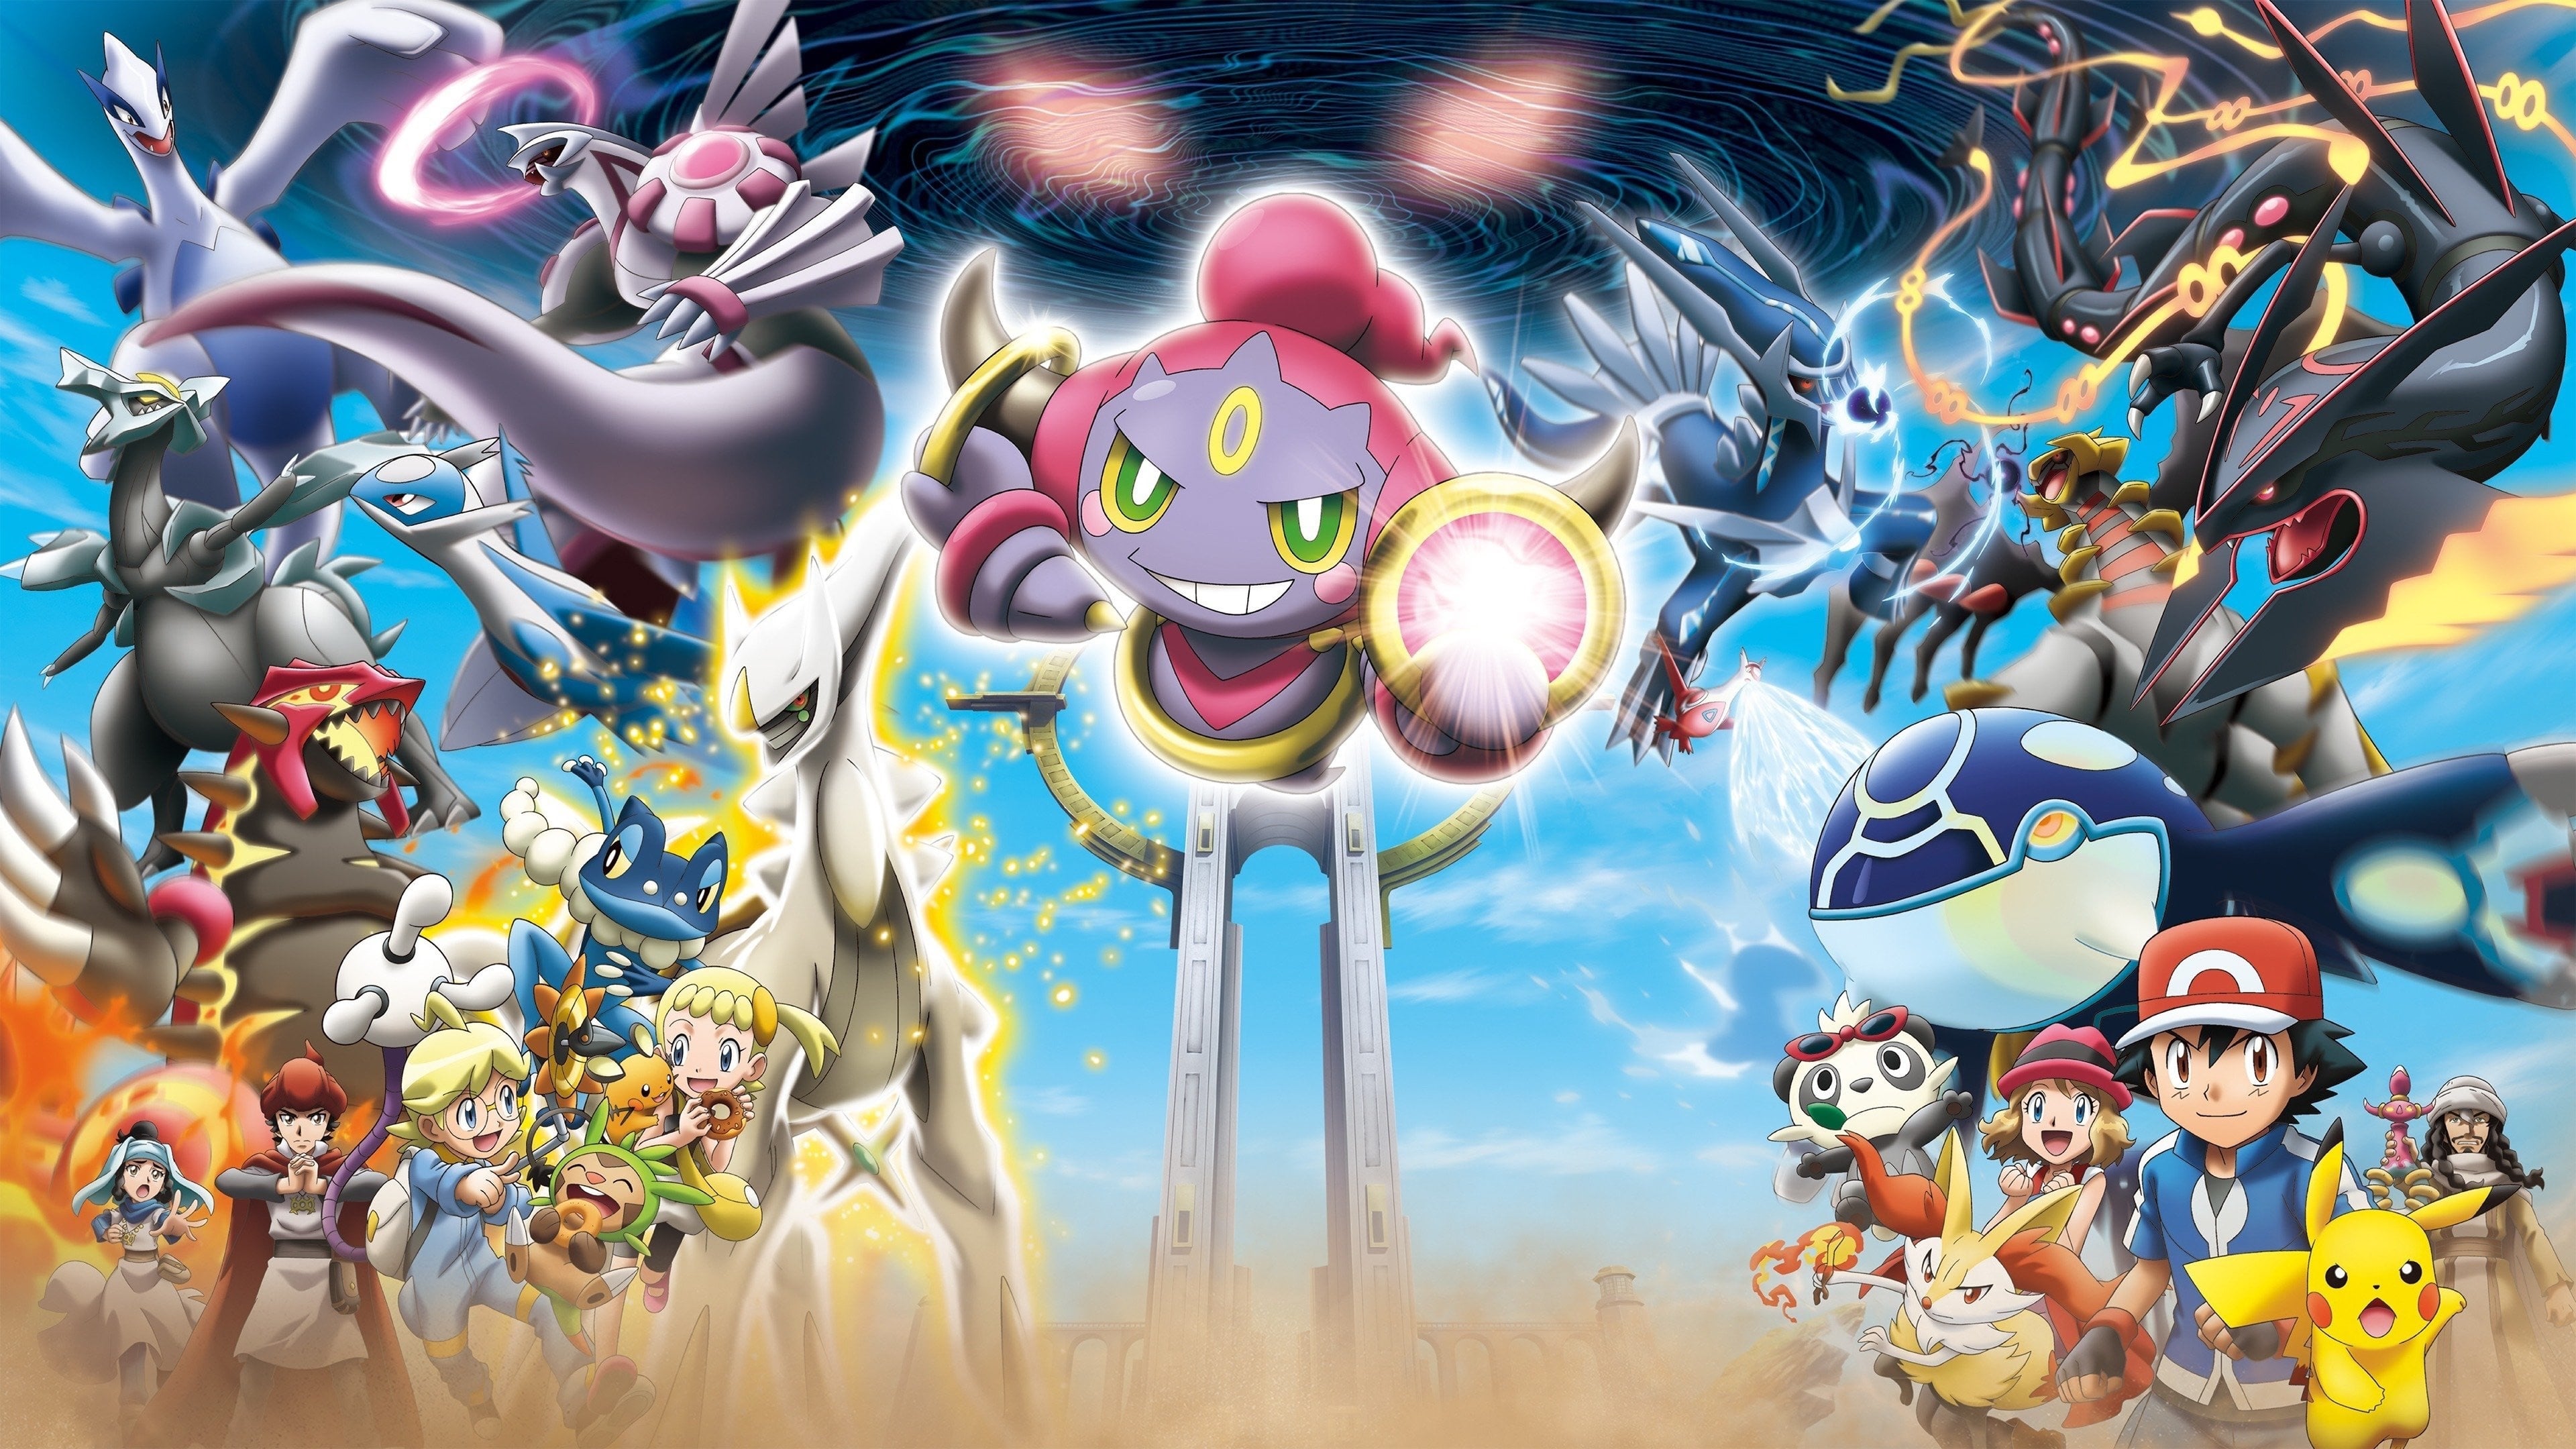 Pokemon movie 18: hoopa và cuộc chiến pokemon huyền thoại - Pokemon movie 18: hoopa and the clash of ages